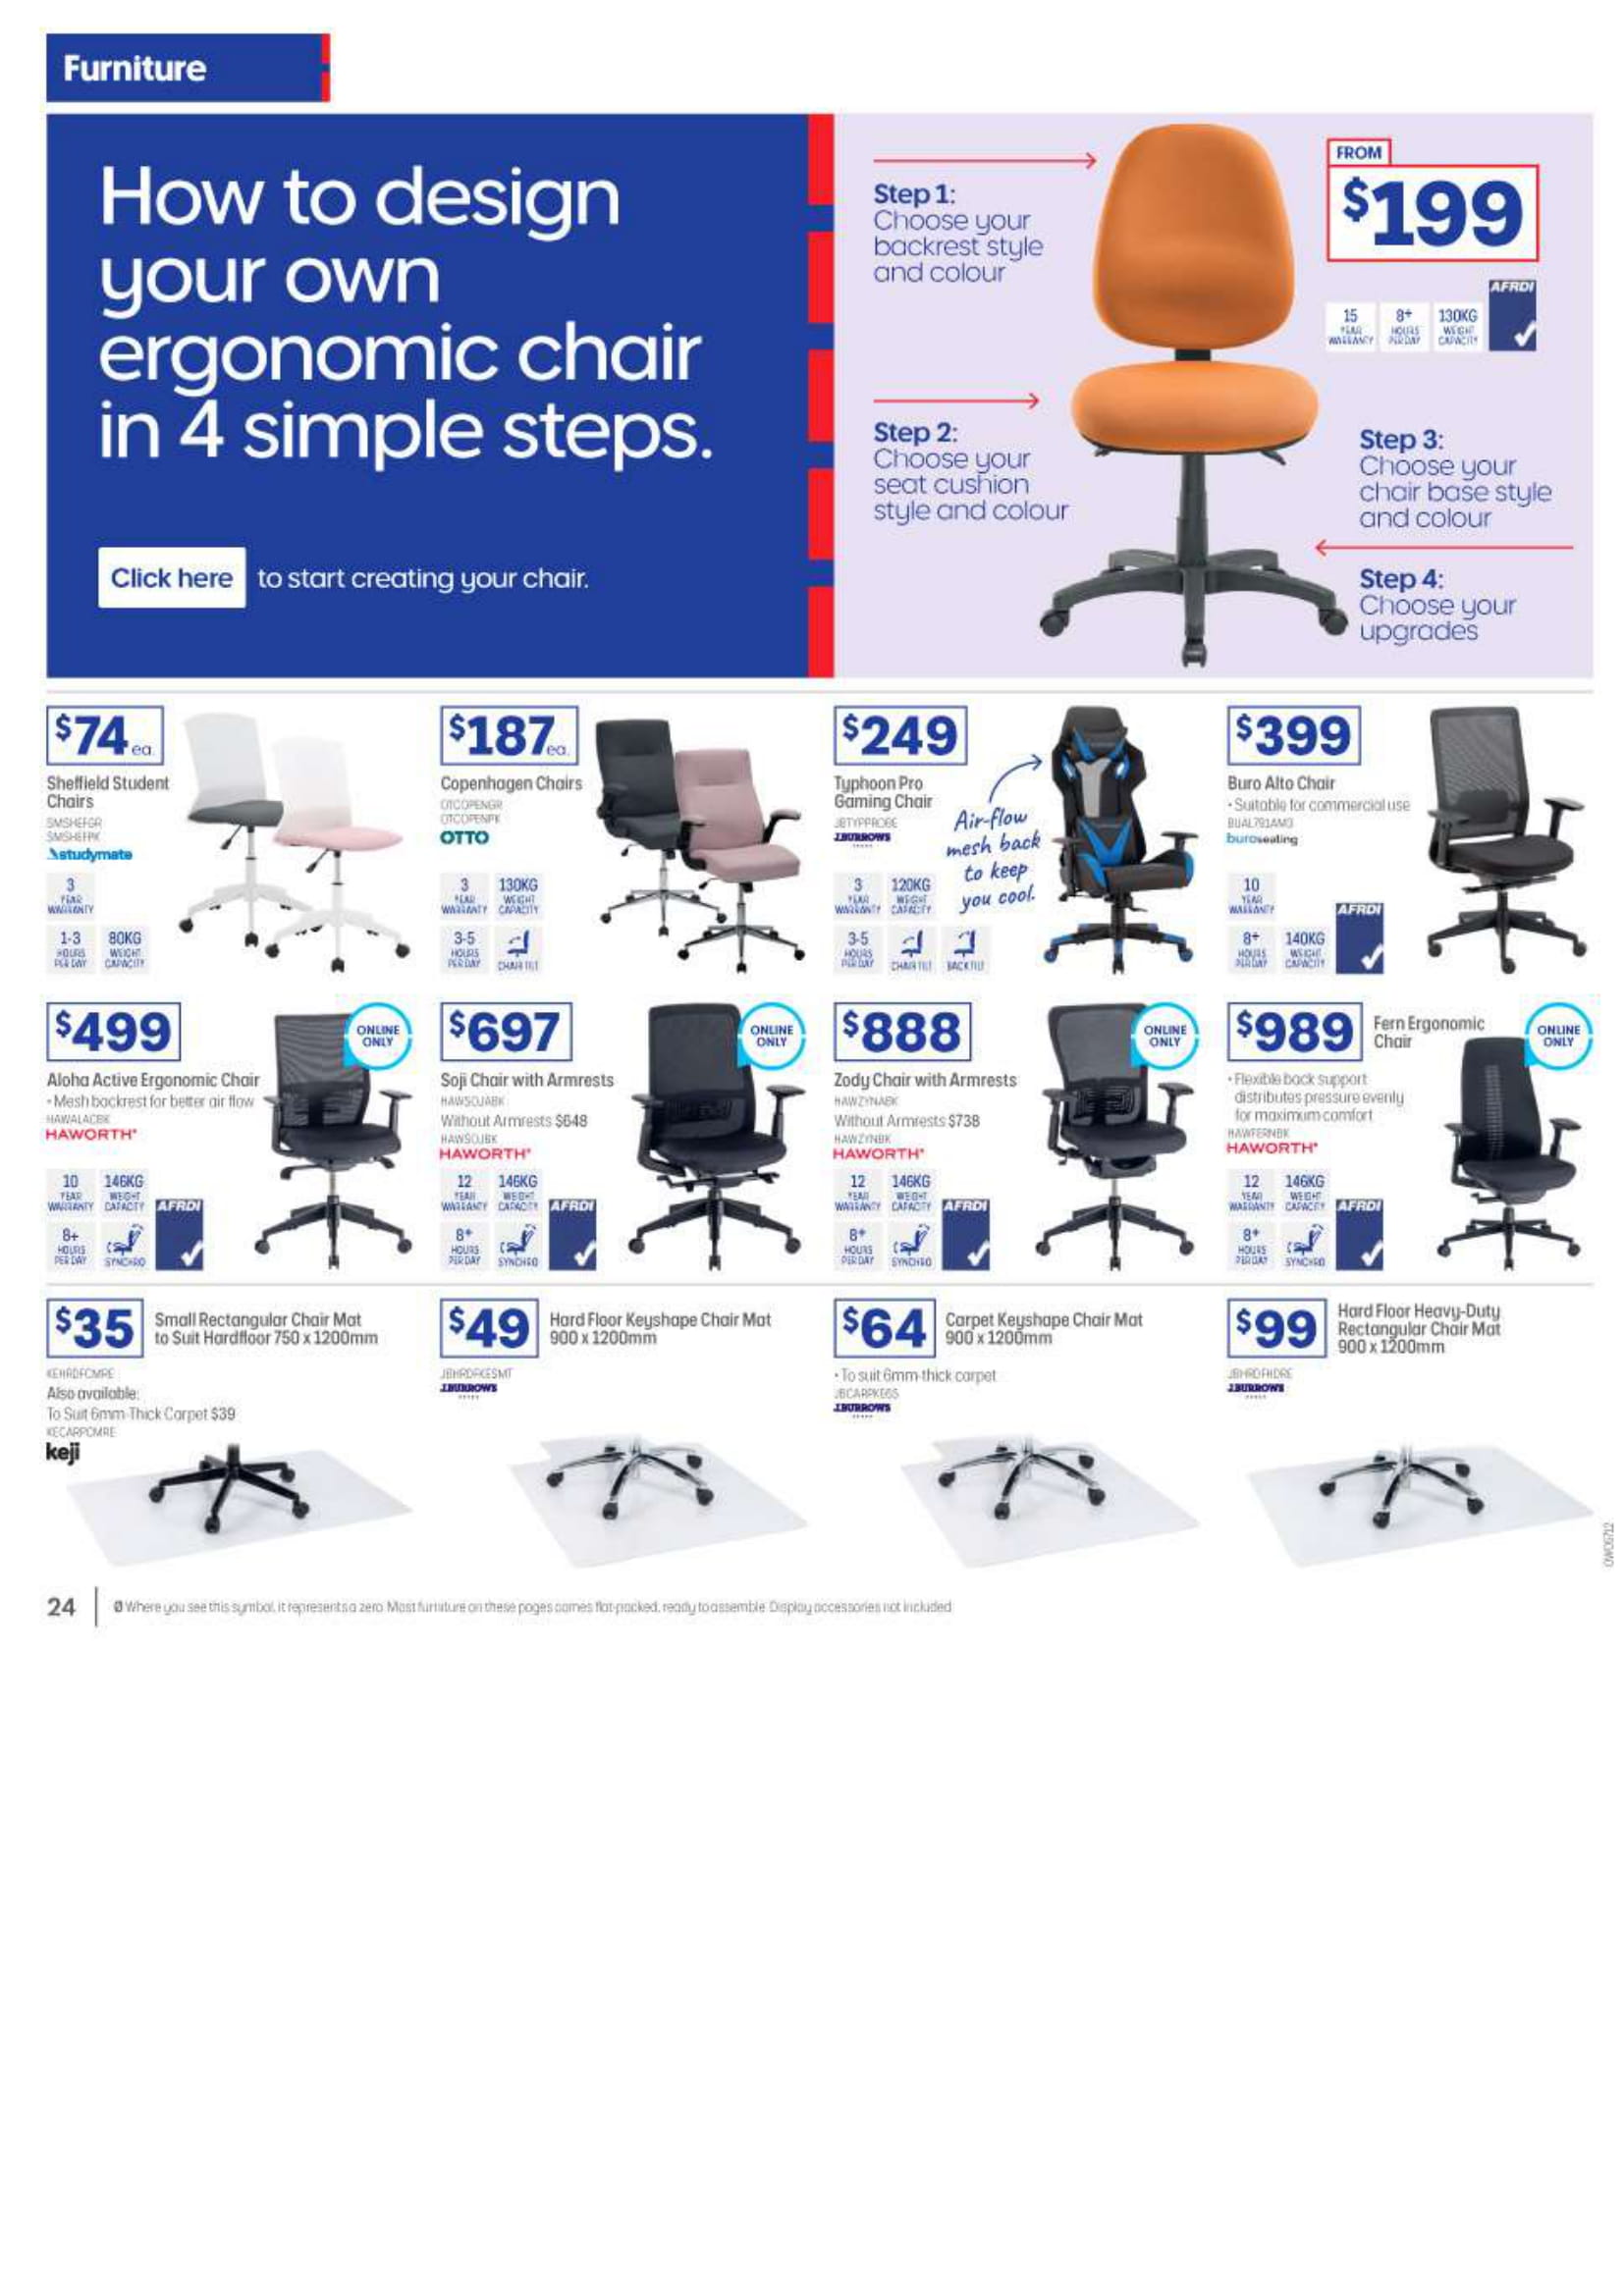 Catalogue Officeworks 29.08.2021 - 07.09.2021